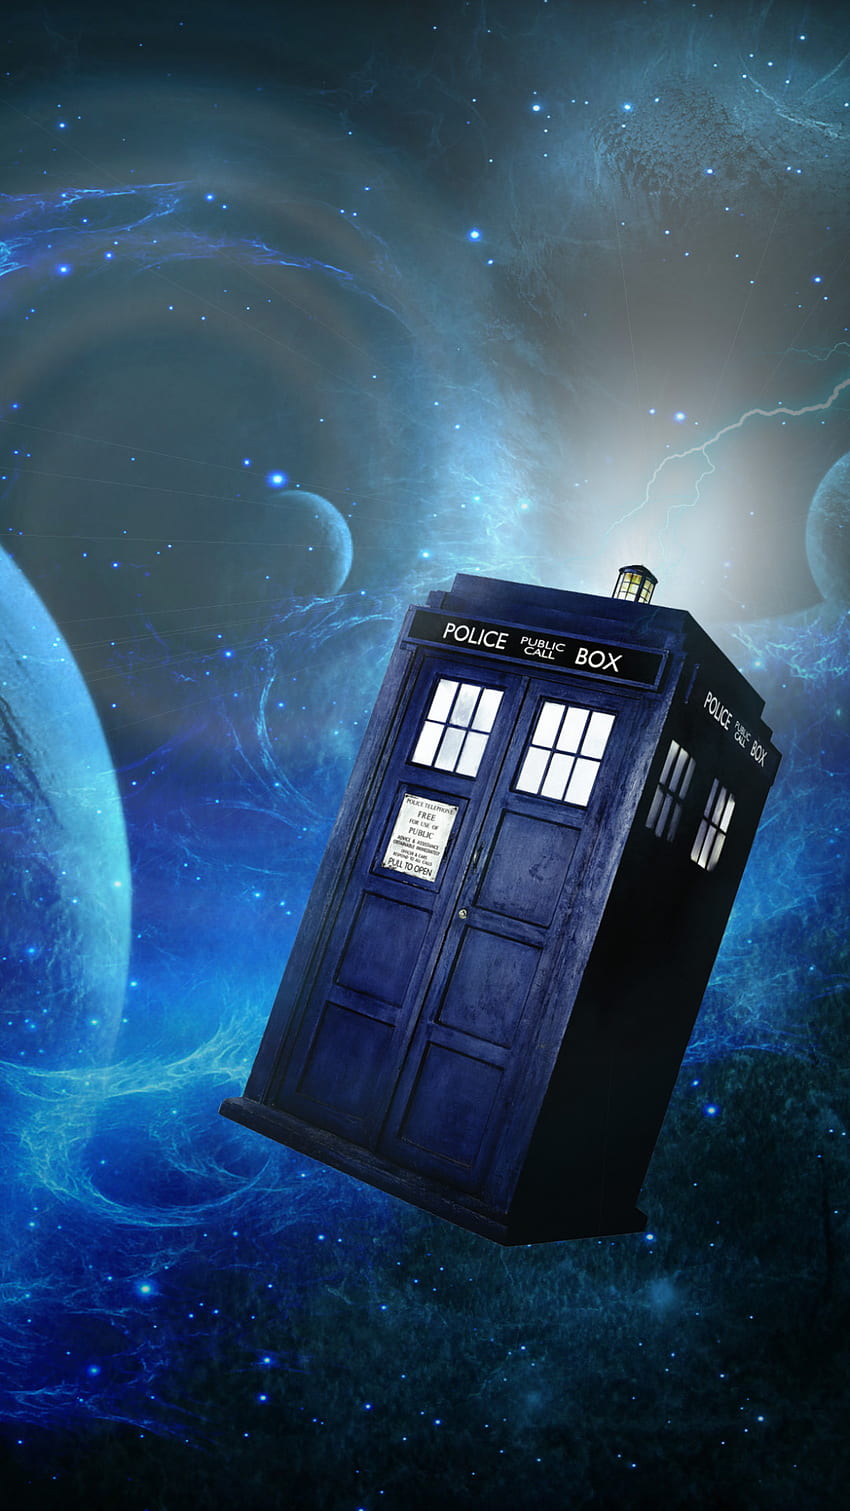 28 Desember 2015 - Doctor Who IPhone wallpaper ponsel HD